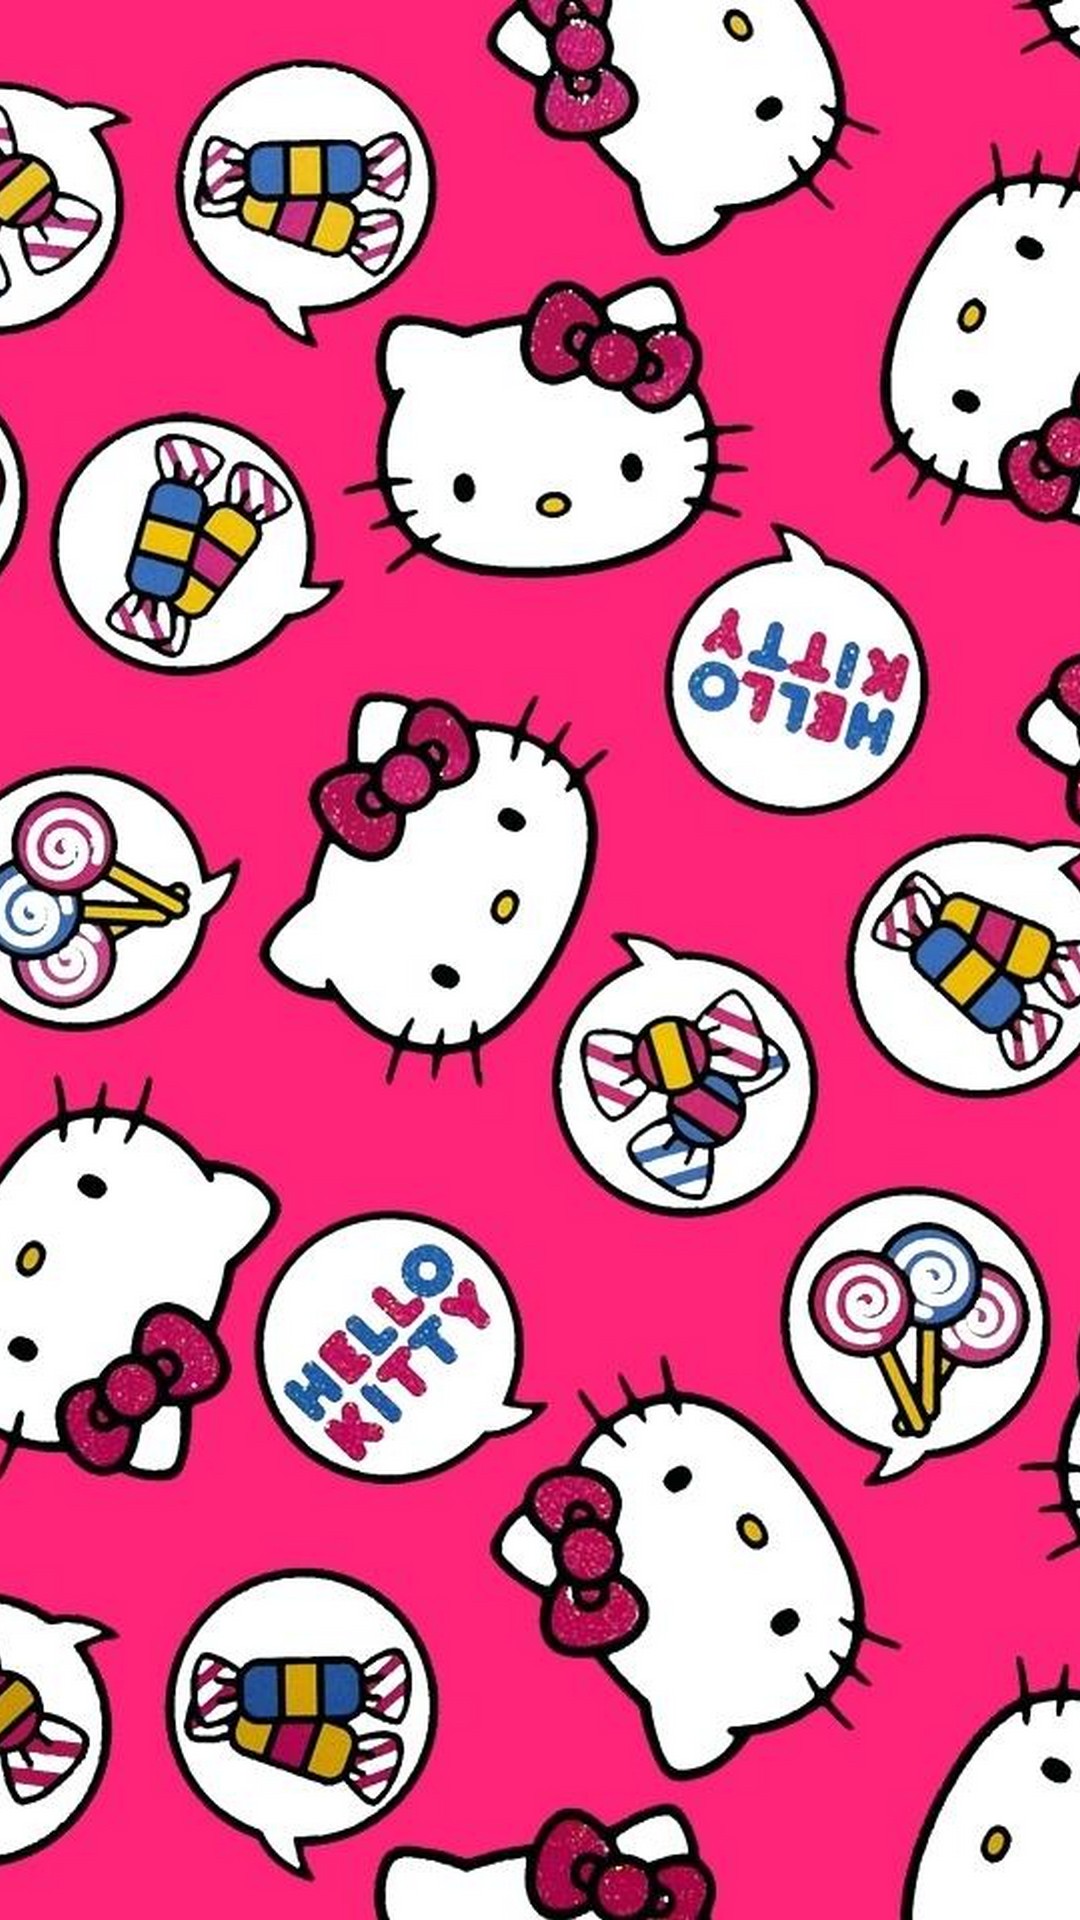 Sanrio Hello Kitty iPhone 6 Wallpaper with resolution 1080X1920 pixel. You can use this wallpaper as background for your desktop Computer Screensavers, Android or iPhone smartphones